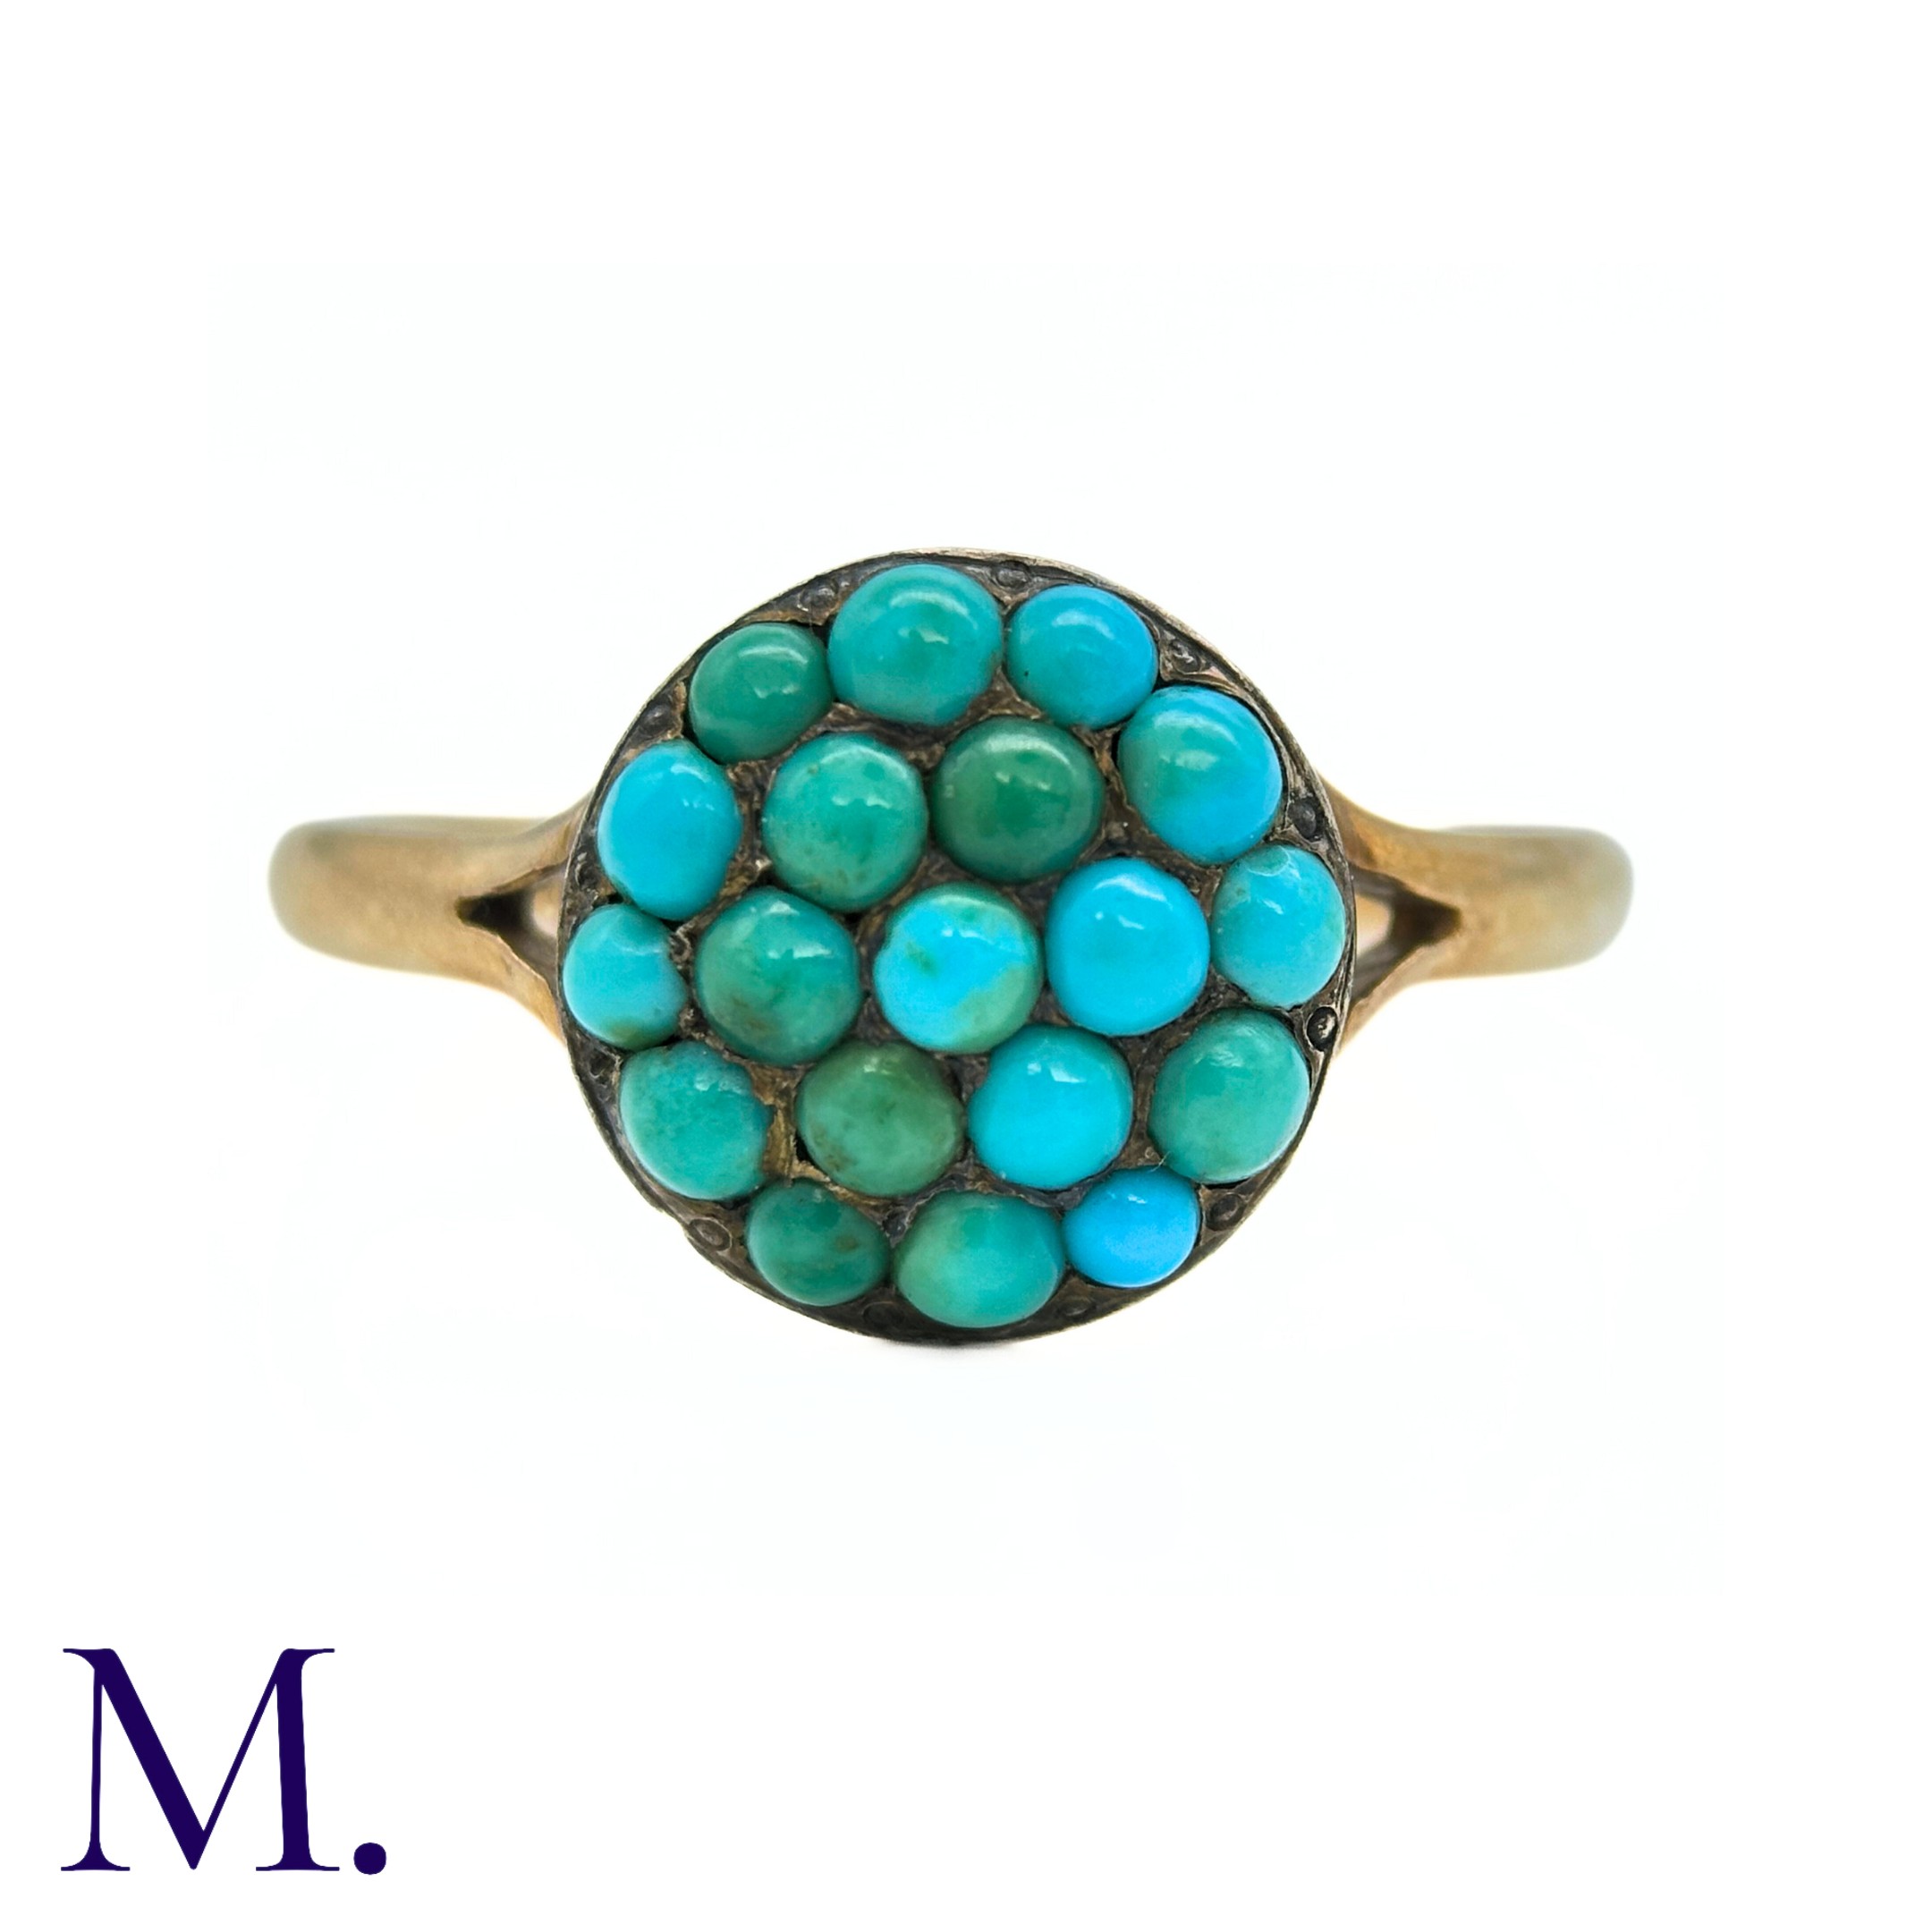 An Antique Turquoise Ring in yellow gold, the face pave set with cabochon turquoise. (Untested but